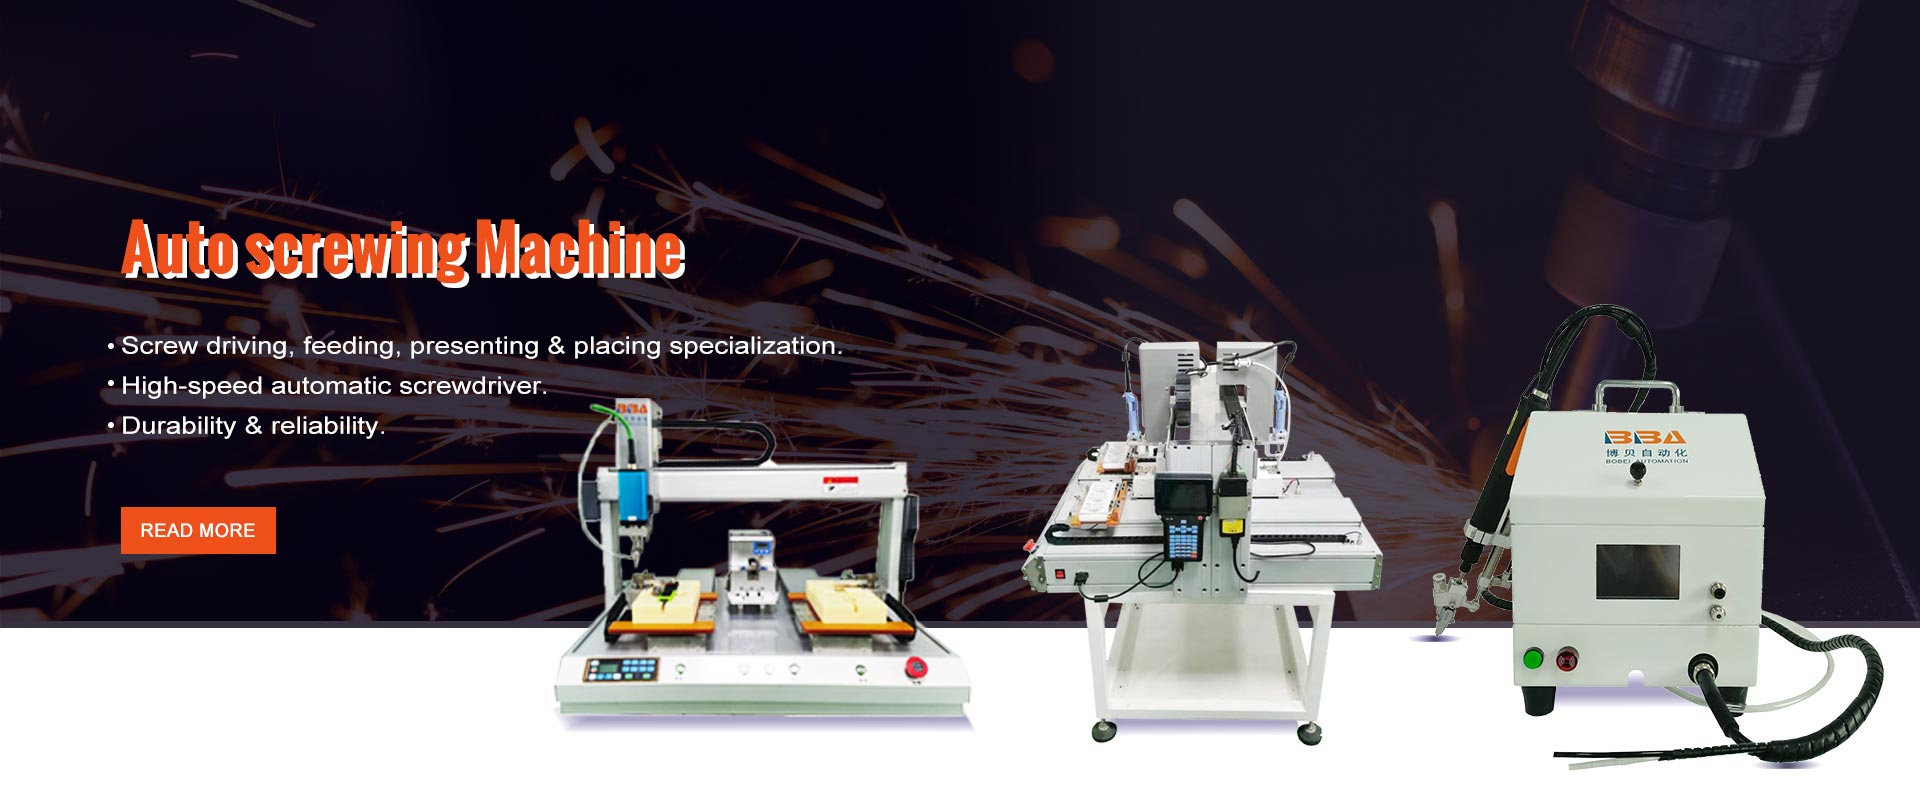 Automated soldering machine for Pcb